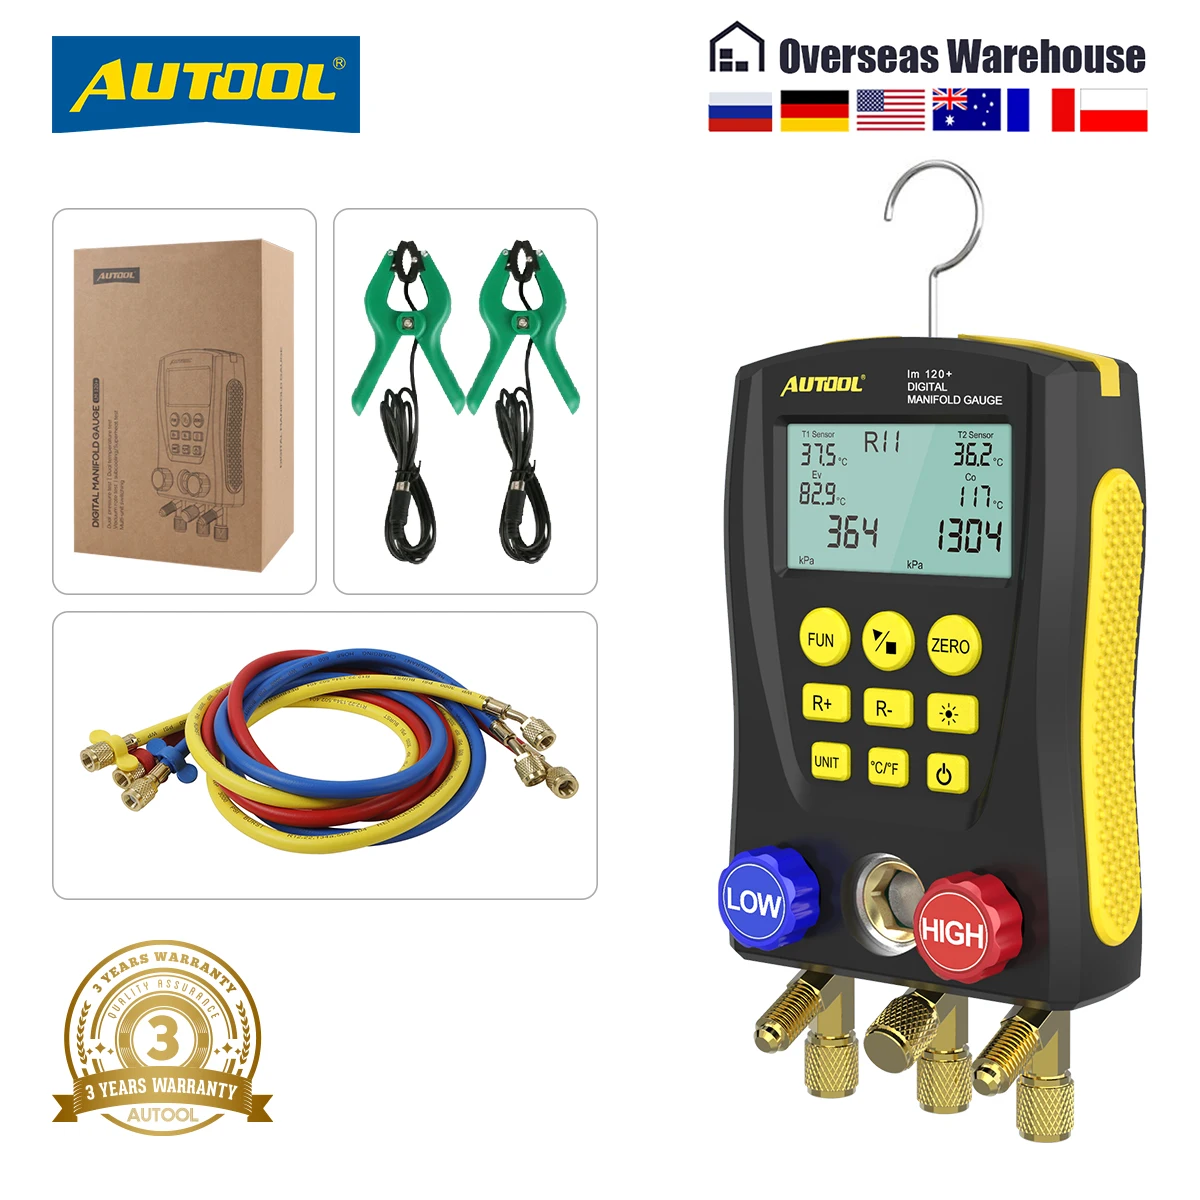 AUTOOL LM120+ Digital Manifold Meter Air Conditioning Vacuum Gauge for R... - $378.26